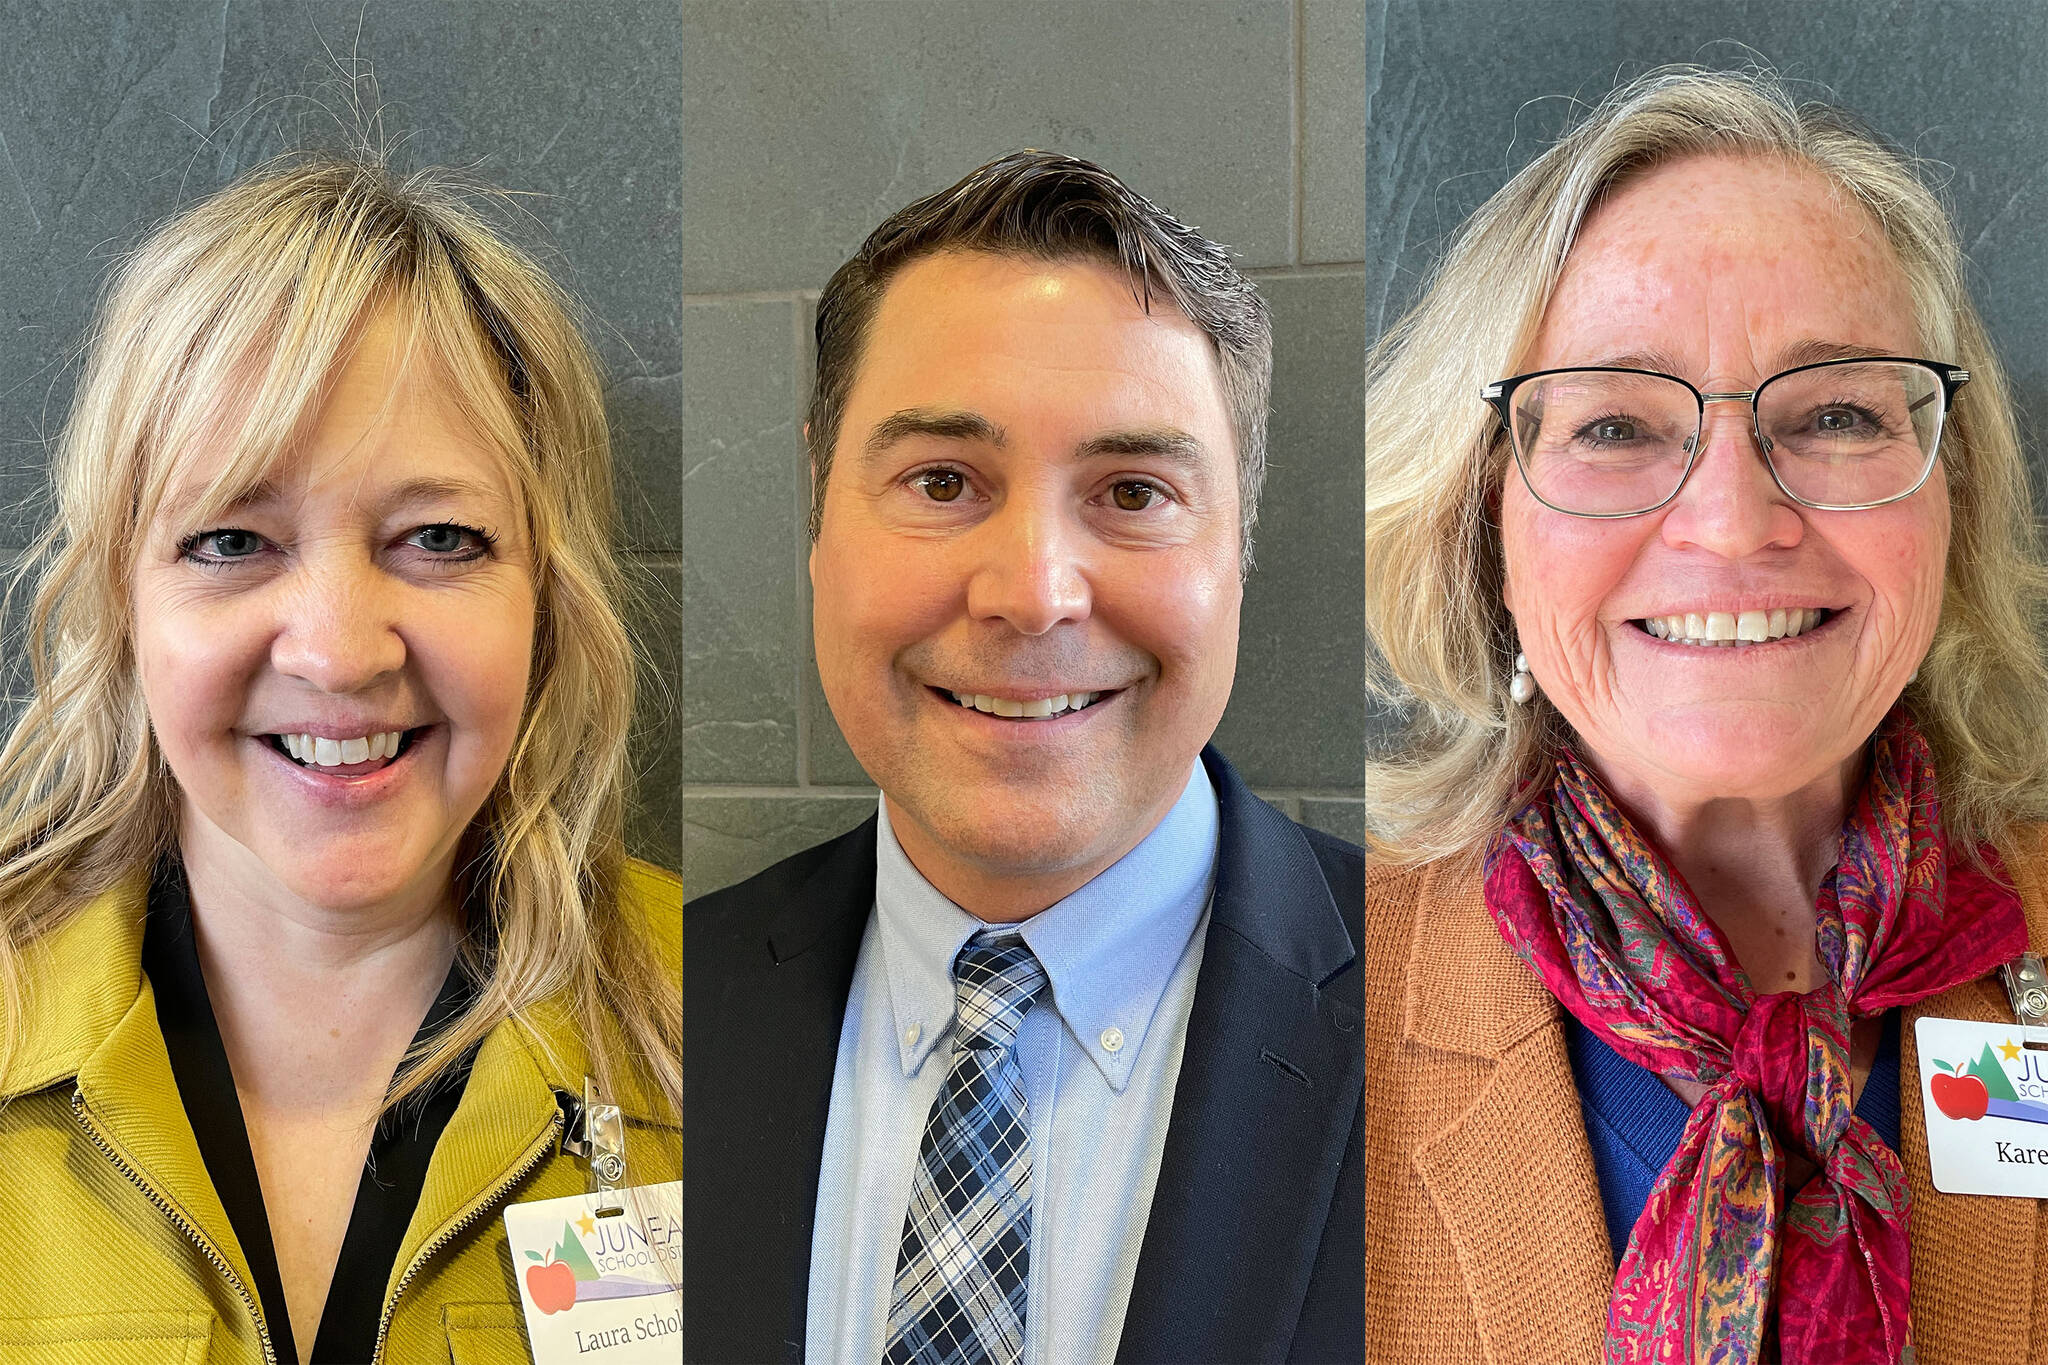 Laura Scholes, Shawn Arnold and Karen Keck have all applied to take over as principal of Thunder Mountain High School as the school seeks a permanent replacement for the position. (Michael S. Lockett / Juneau Empire photo illustration)